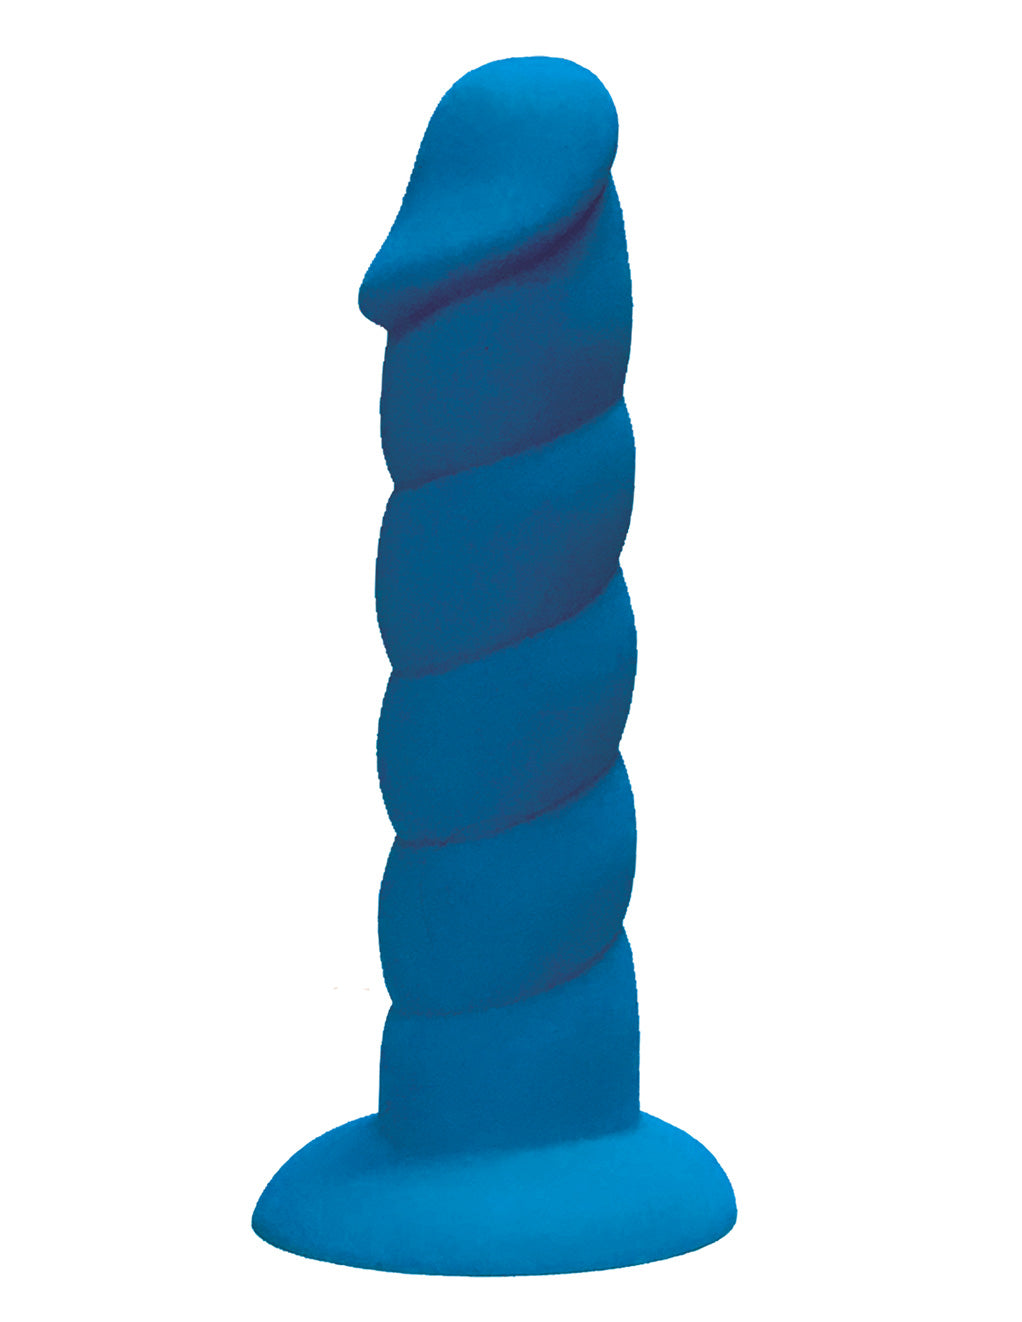 Suga Daddy 8 Inch Suction Cup Dildo by HUSTLER®